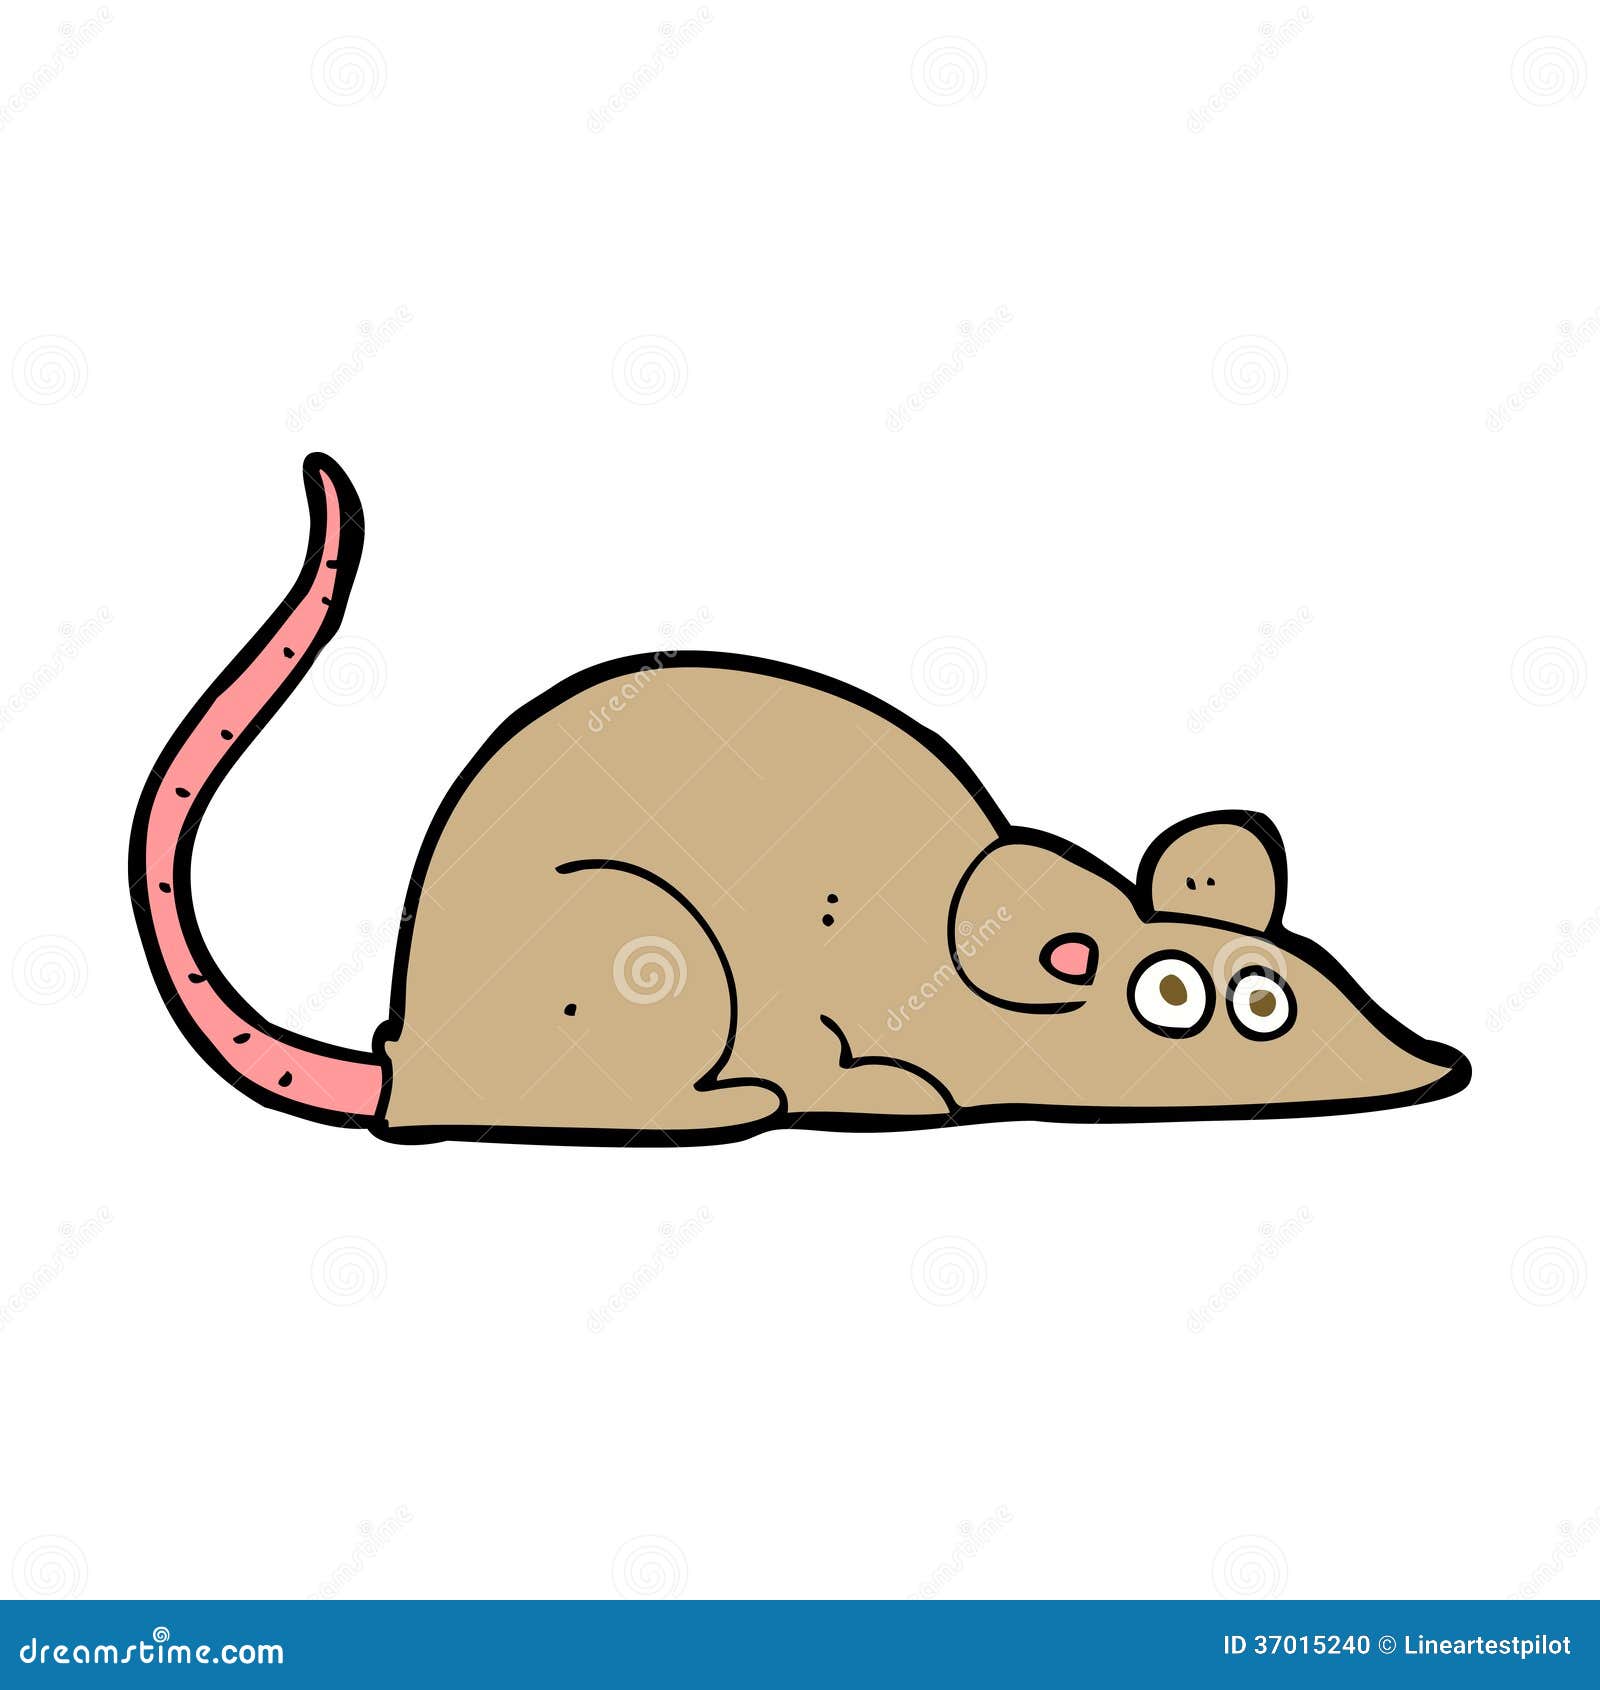 mouse drawing clip art - photo #23